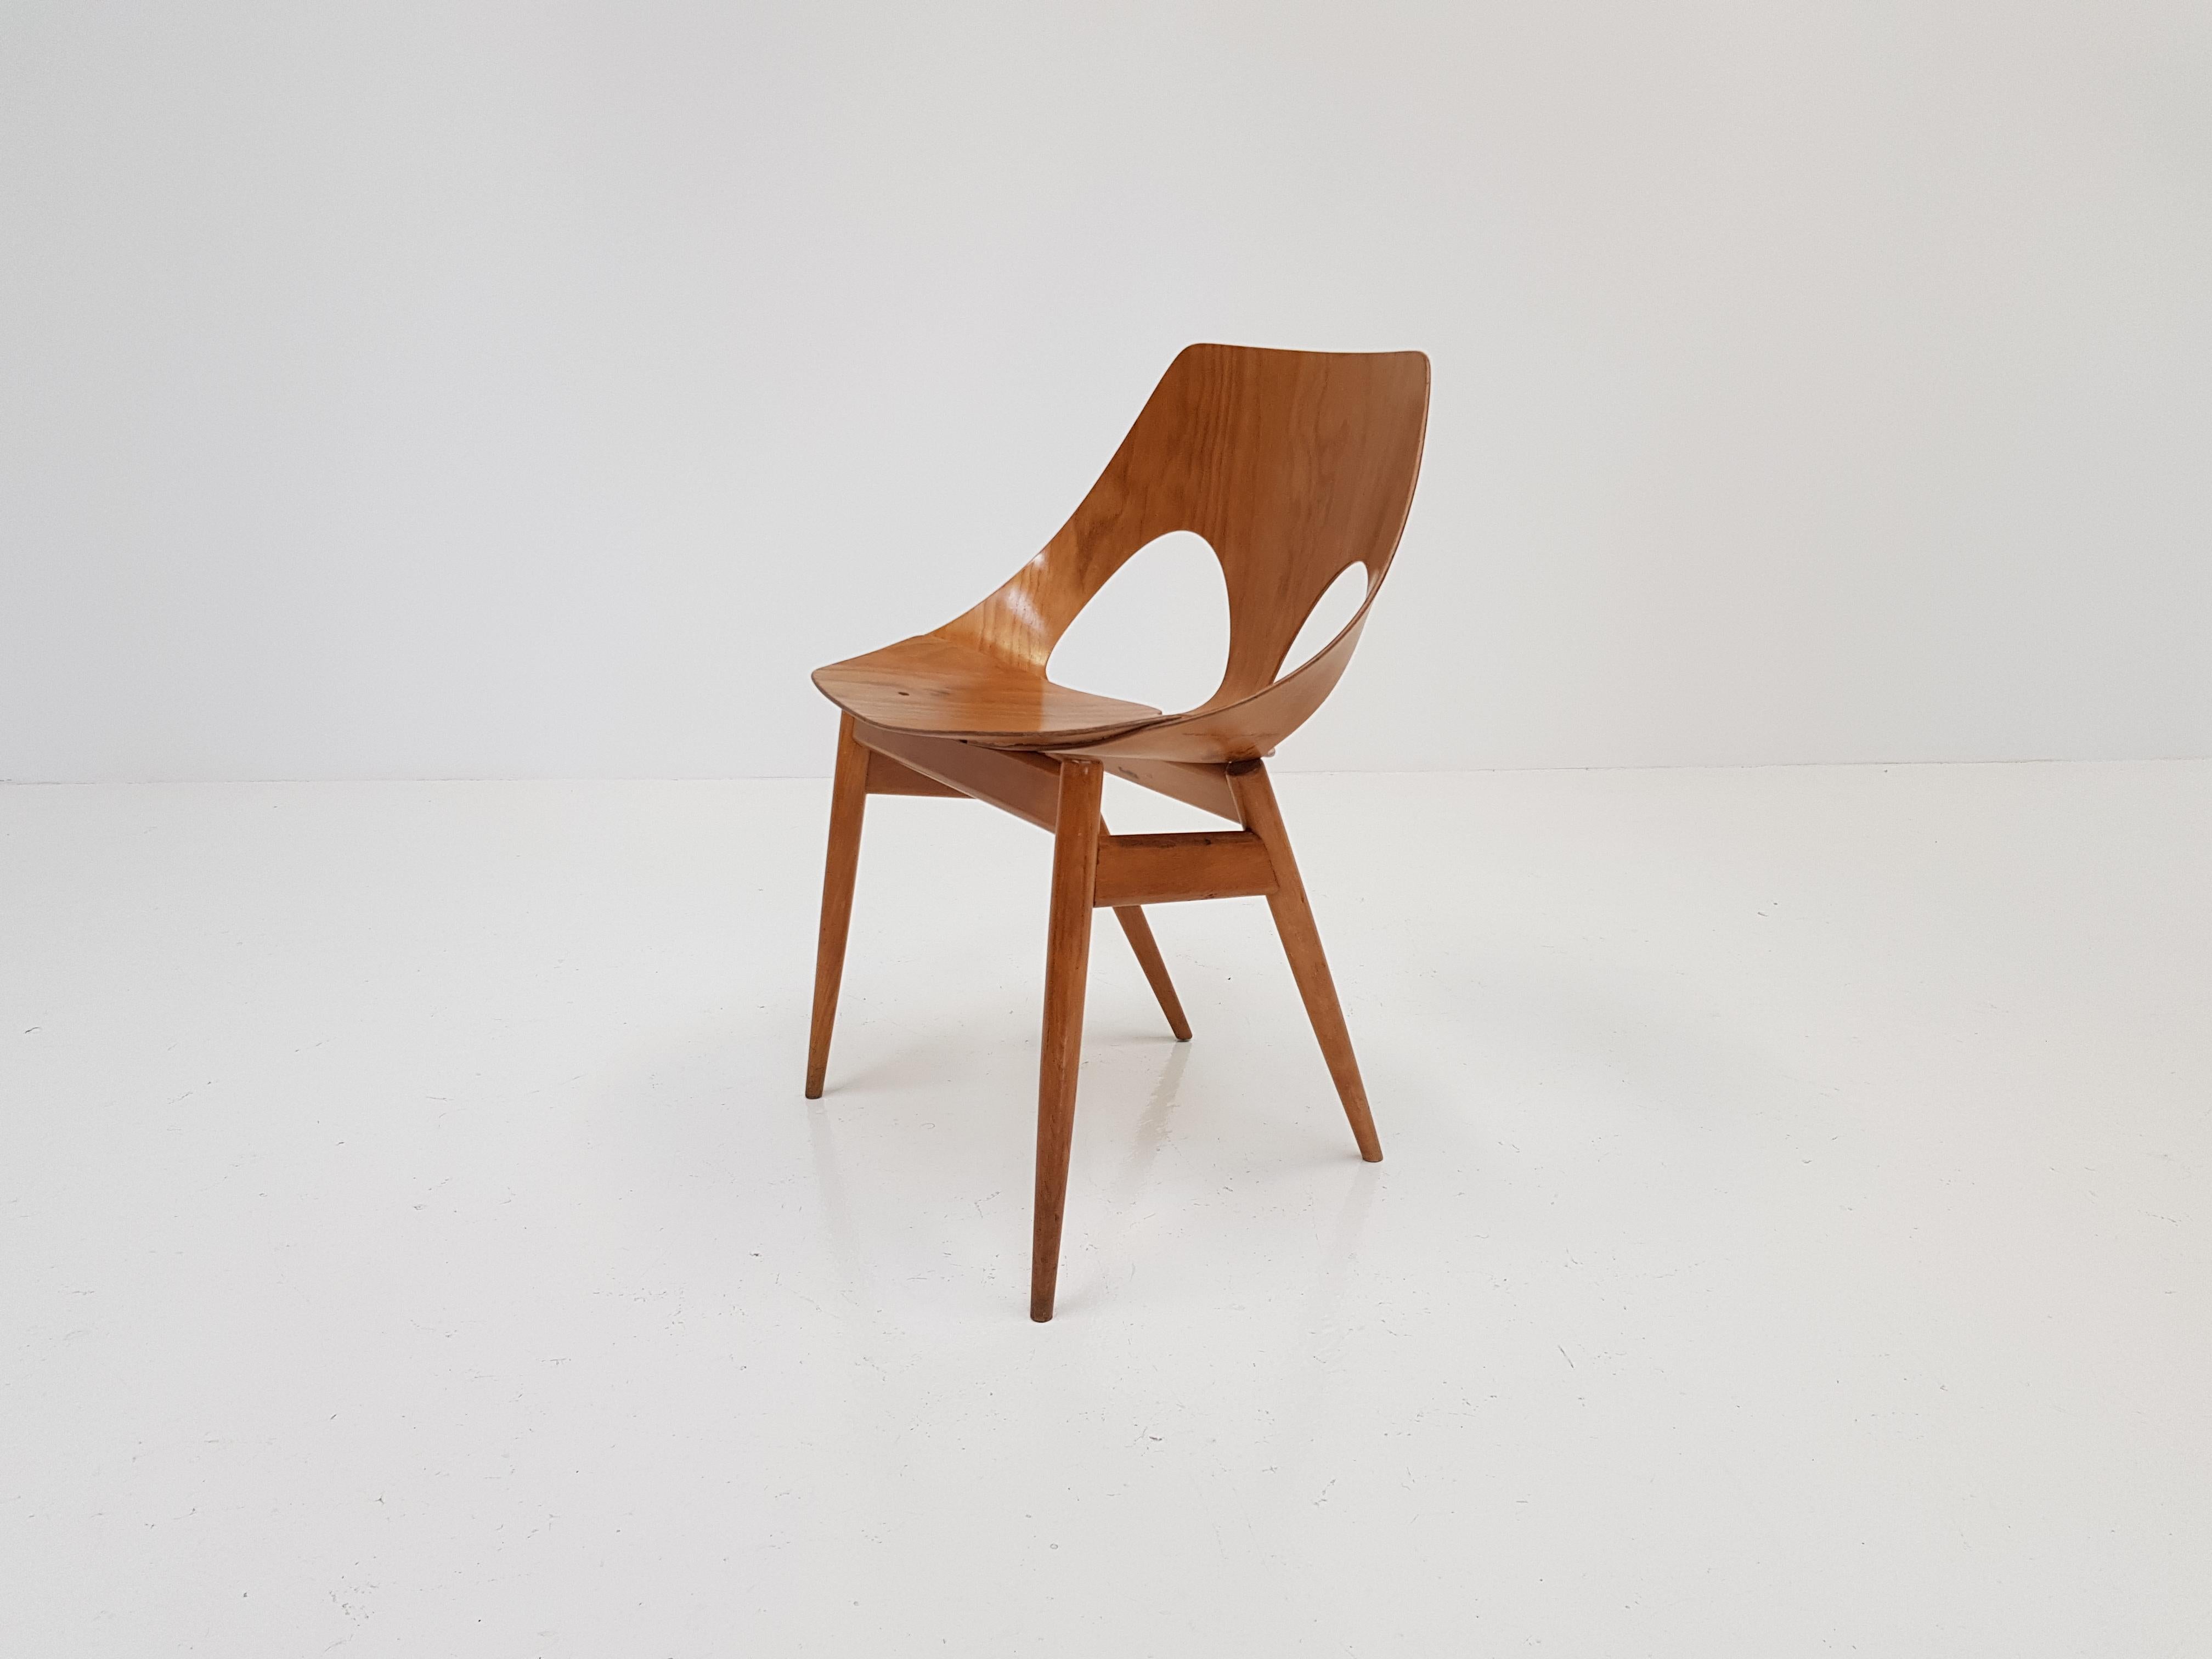 A 'Jason' chair, these iconic chairs were designed in the 1950s by Danish designer Carl Jacobs & Frank Guille and manufactured by Kandya.

The seat and back of the chair are folded from a single sheet of flexible plywood that wraps around the